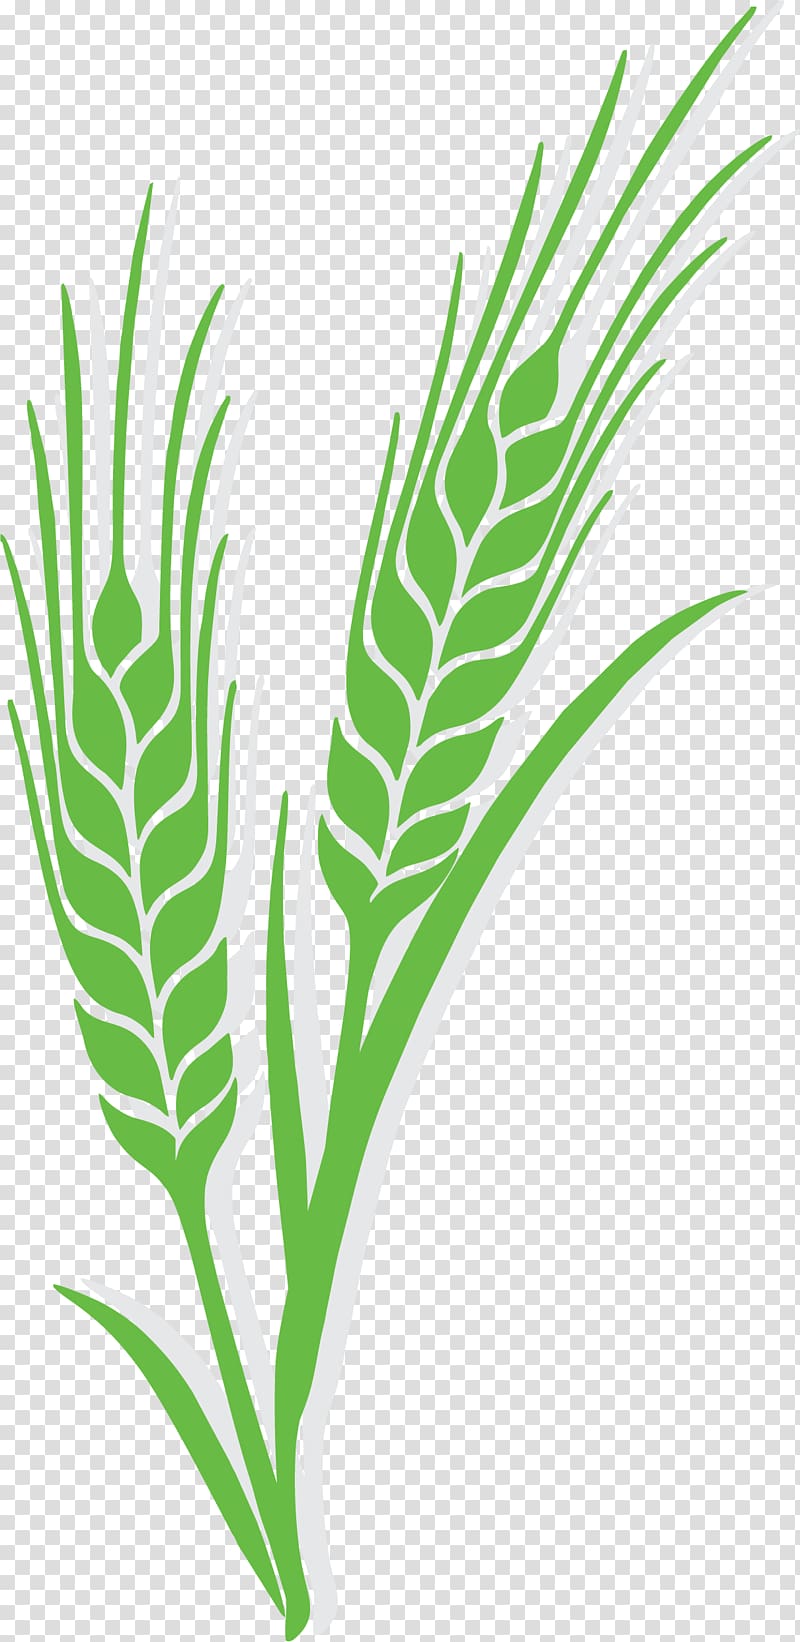 green grain plant illustration, Wheat Euclidean Ear Rye Barley, Green is ripe rice transparent background PNG clipart